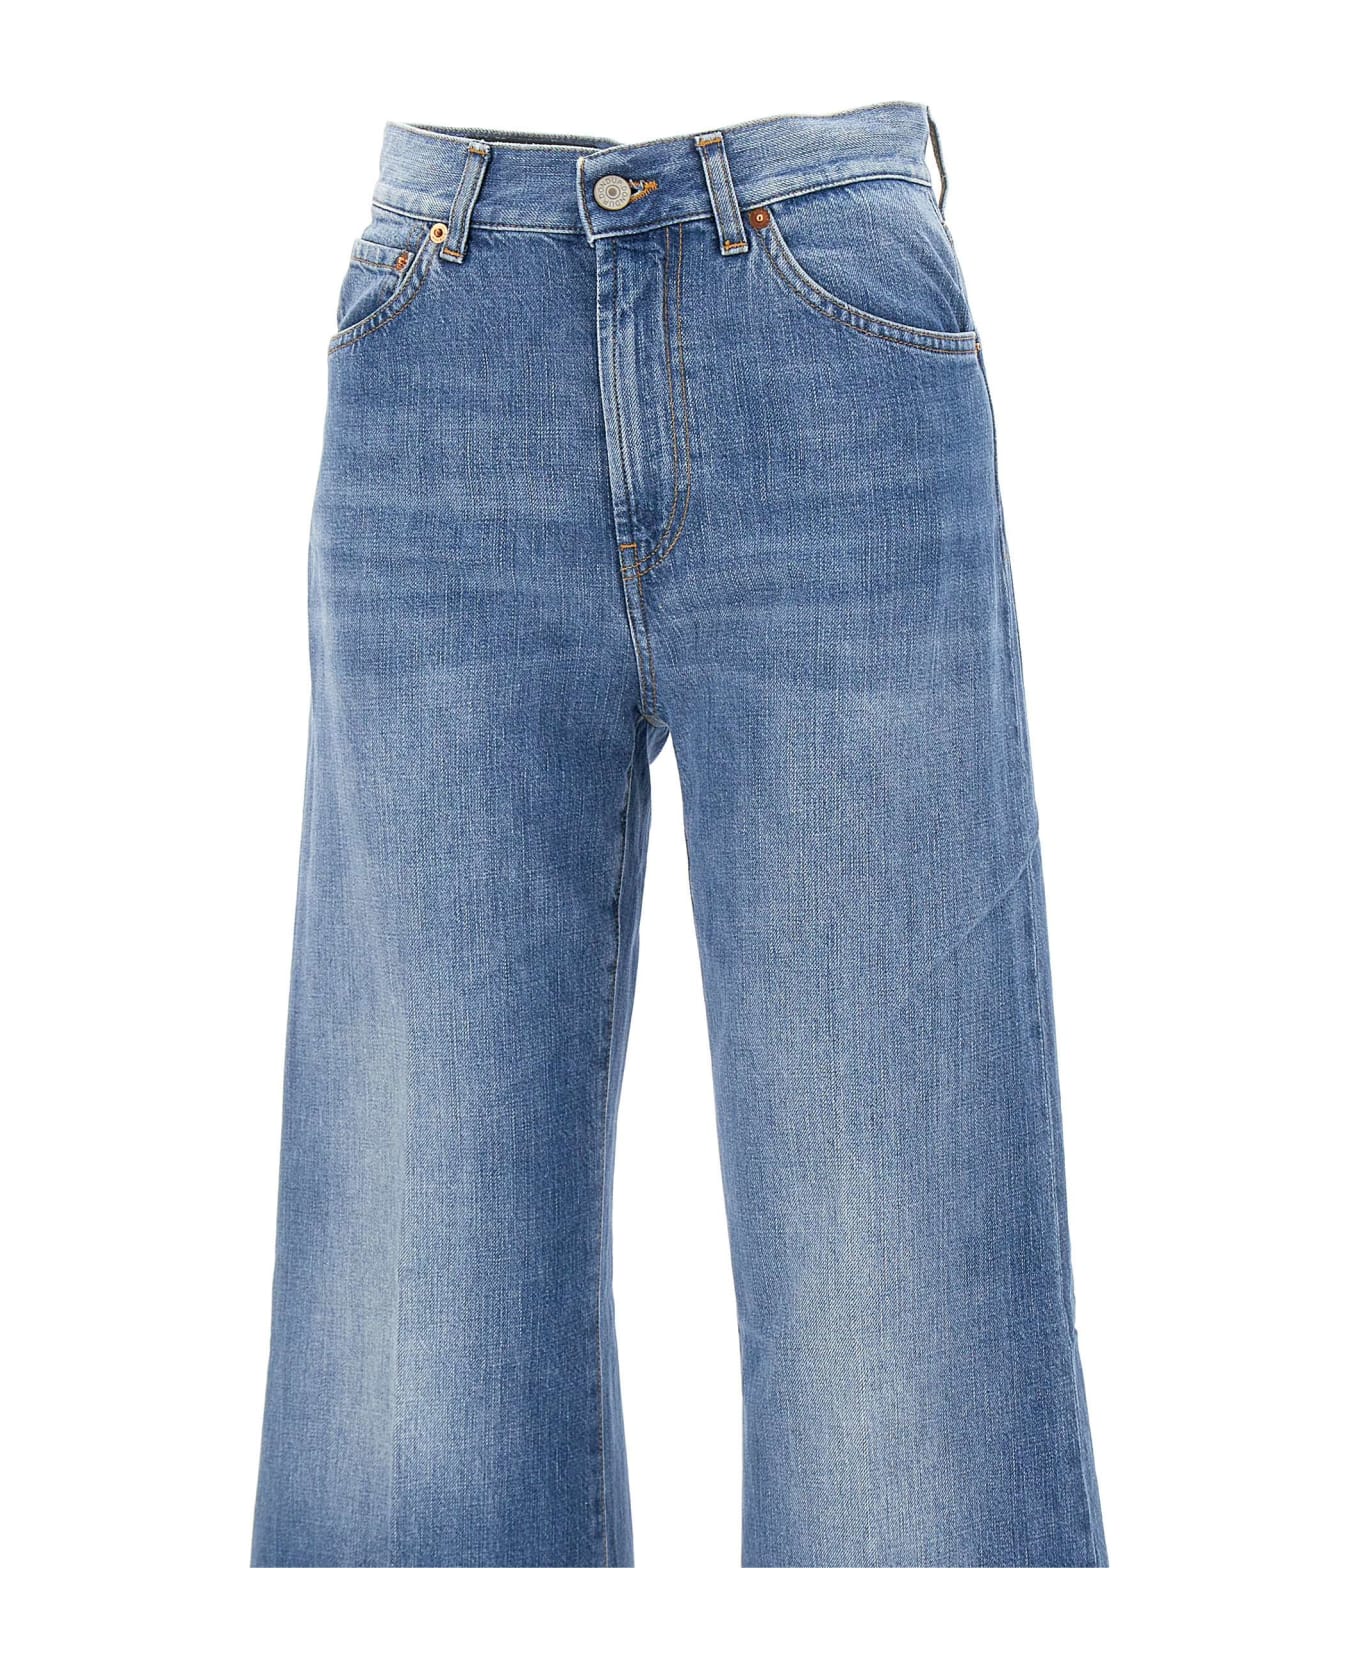 Dondup "amber" Jeans - BLUE